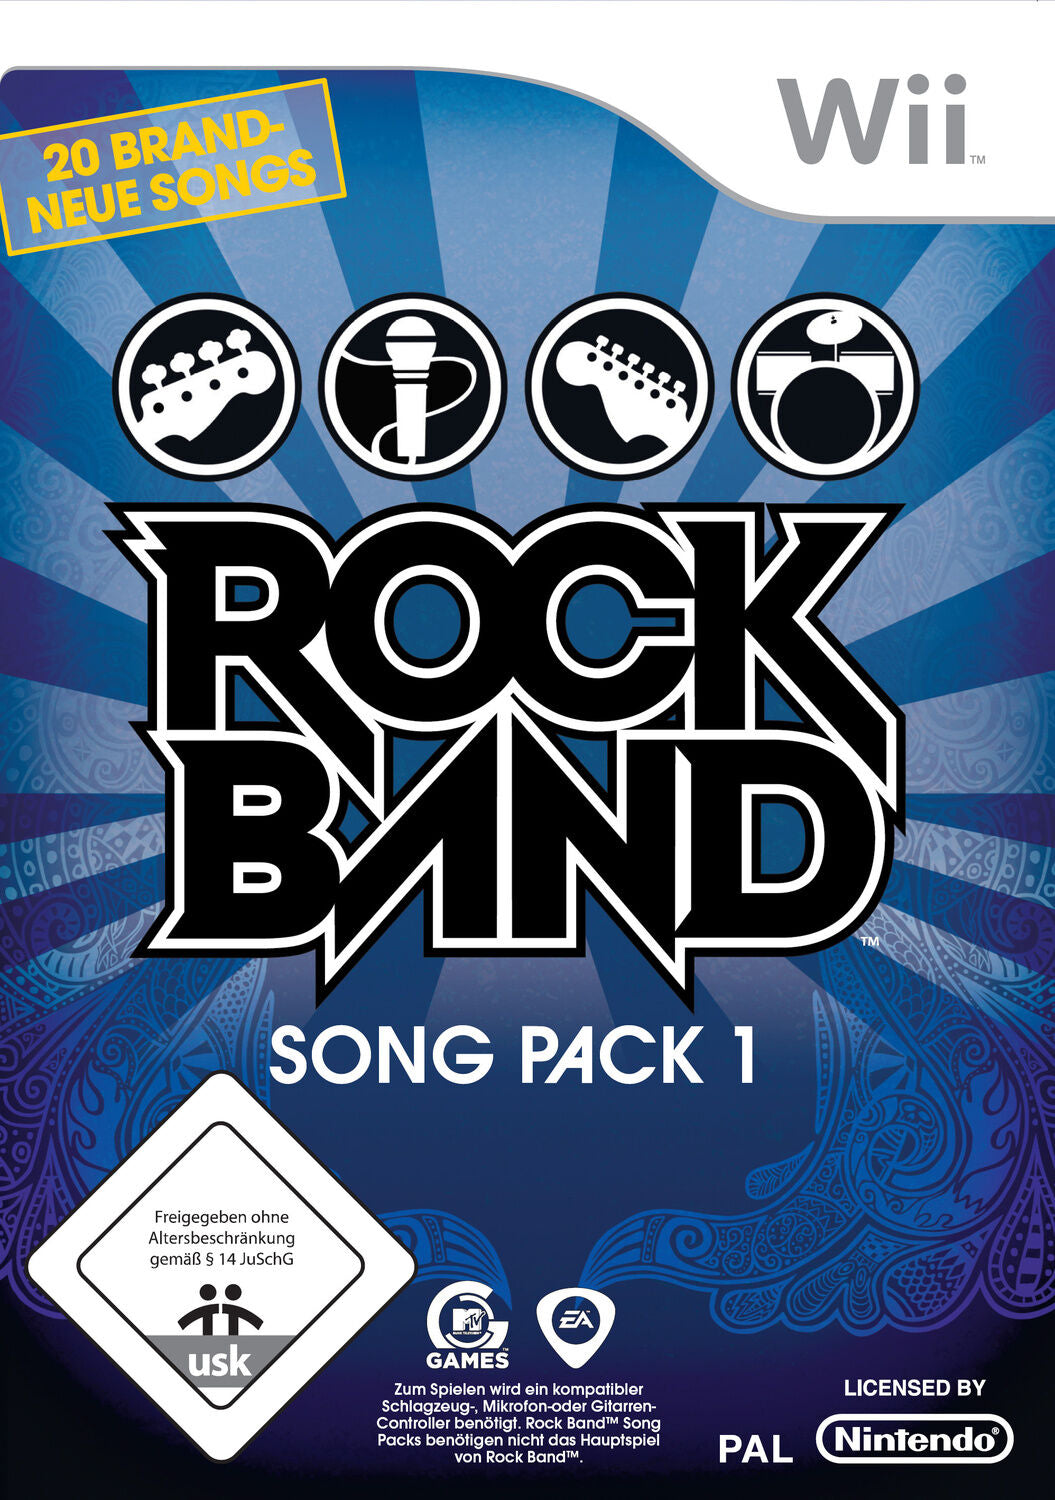 Rock Band Song Pack 1